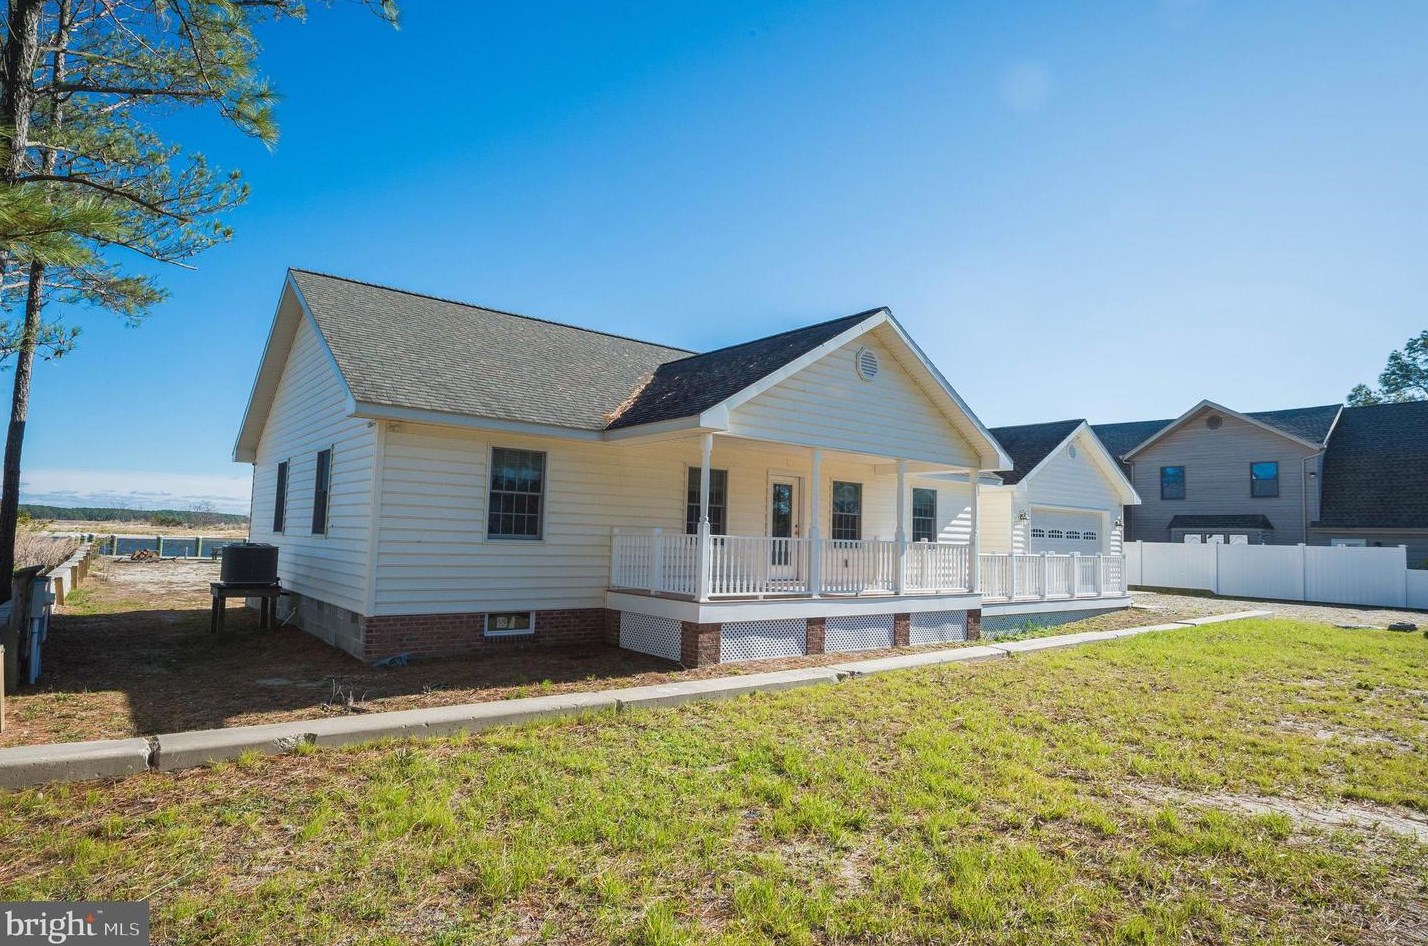 11115 Lee Ave, Deal Island, MD 21821